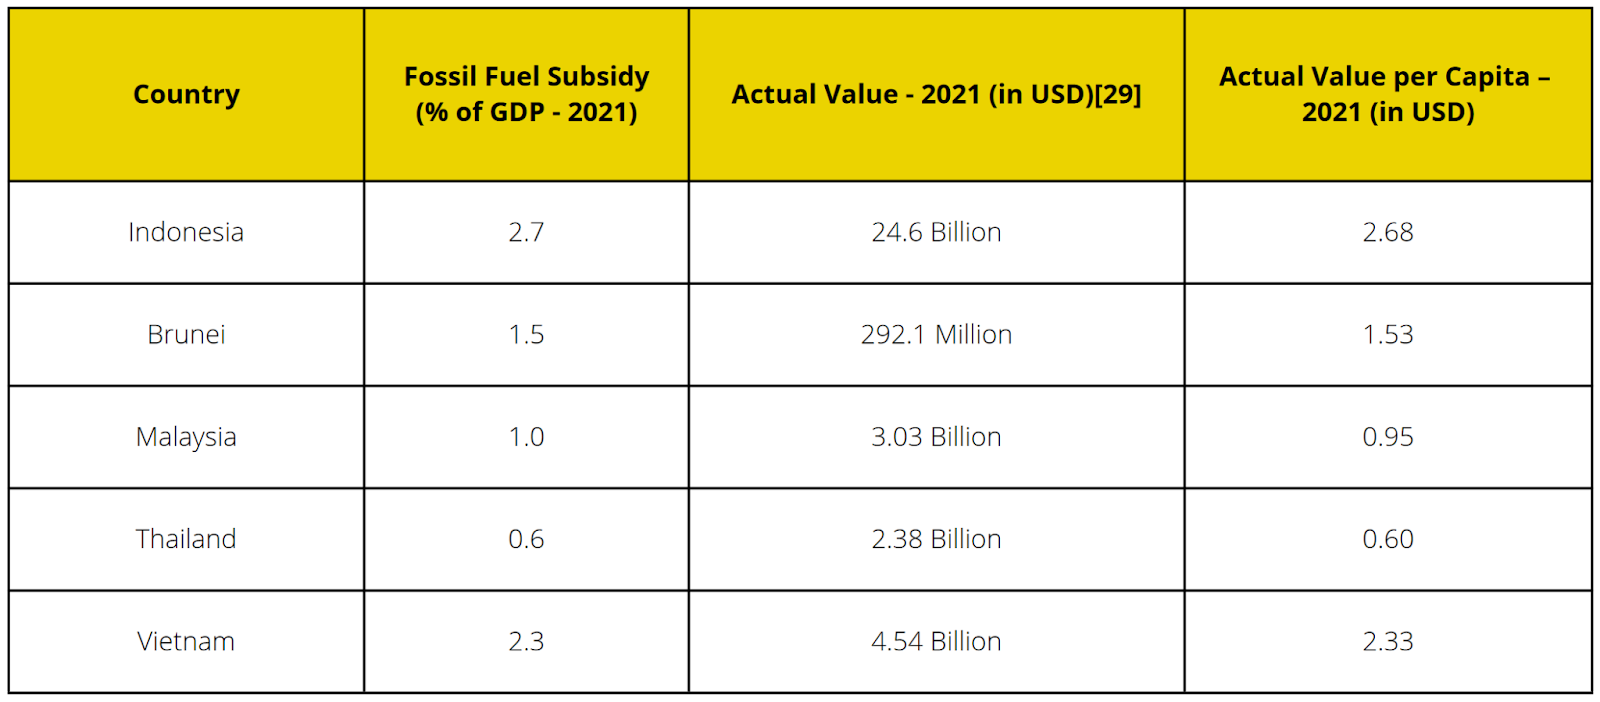 Cost of Fossil Fuel Subsidies by ASEAN country for 2021